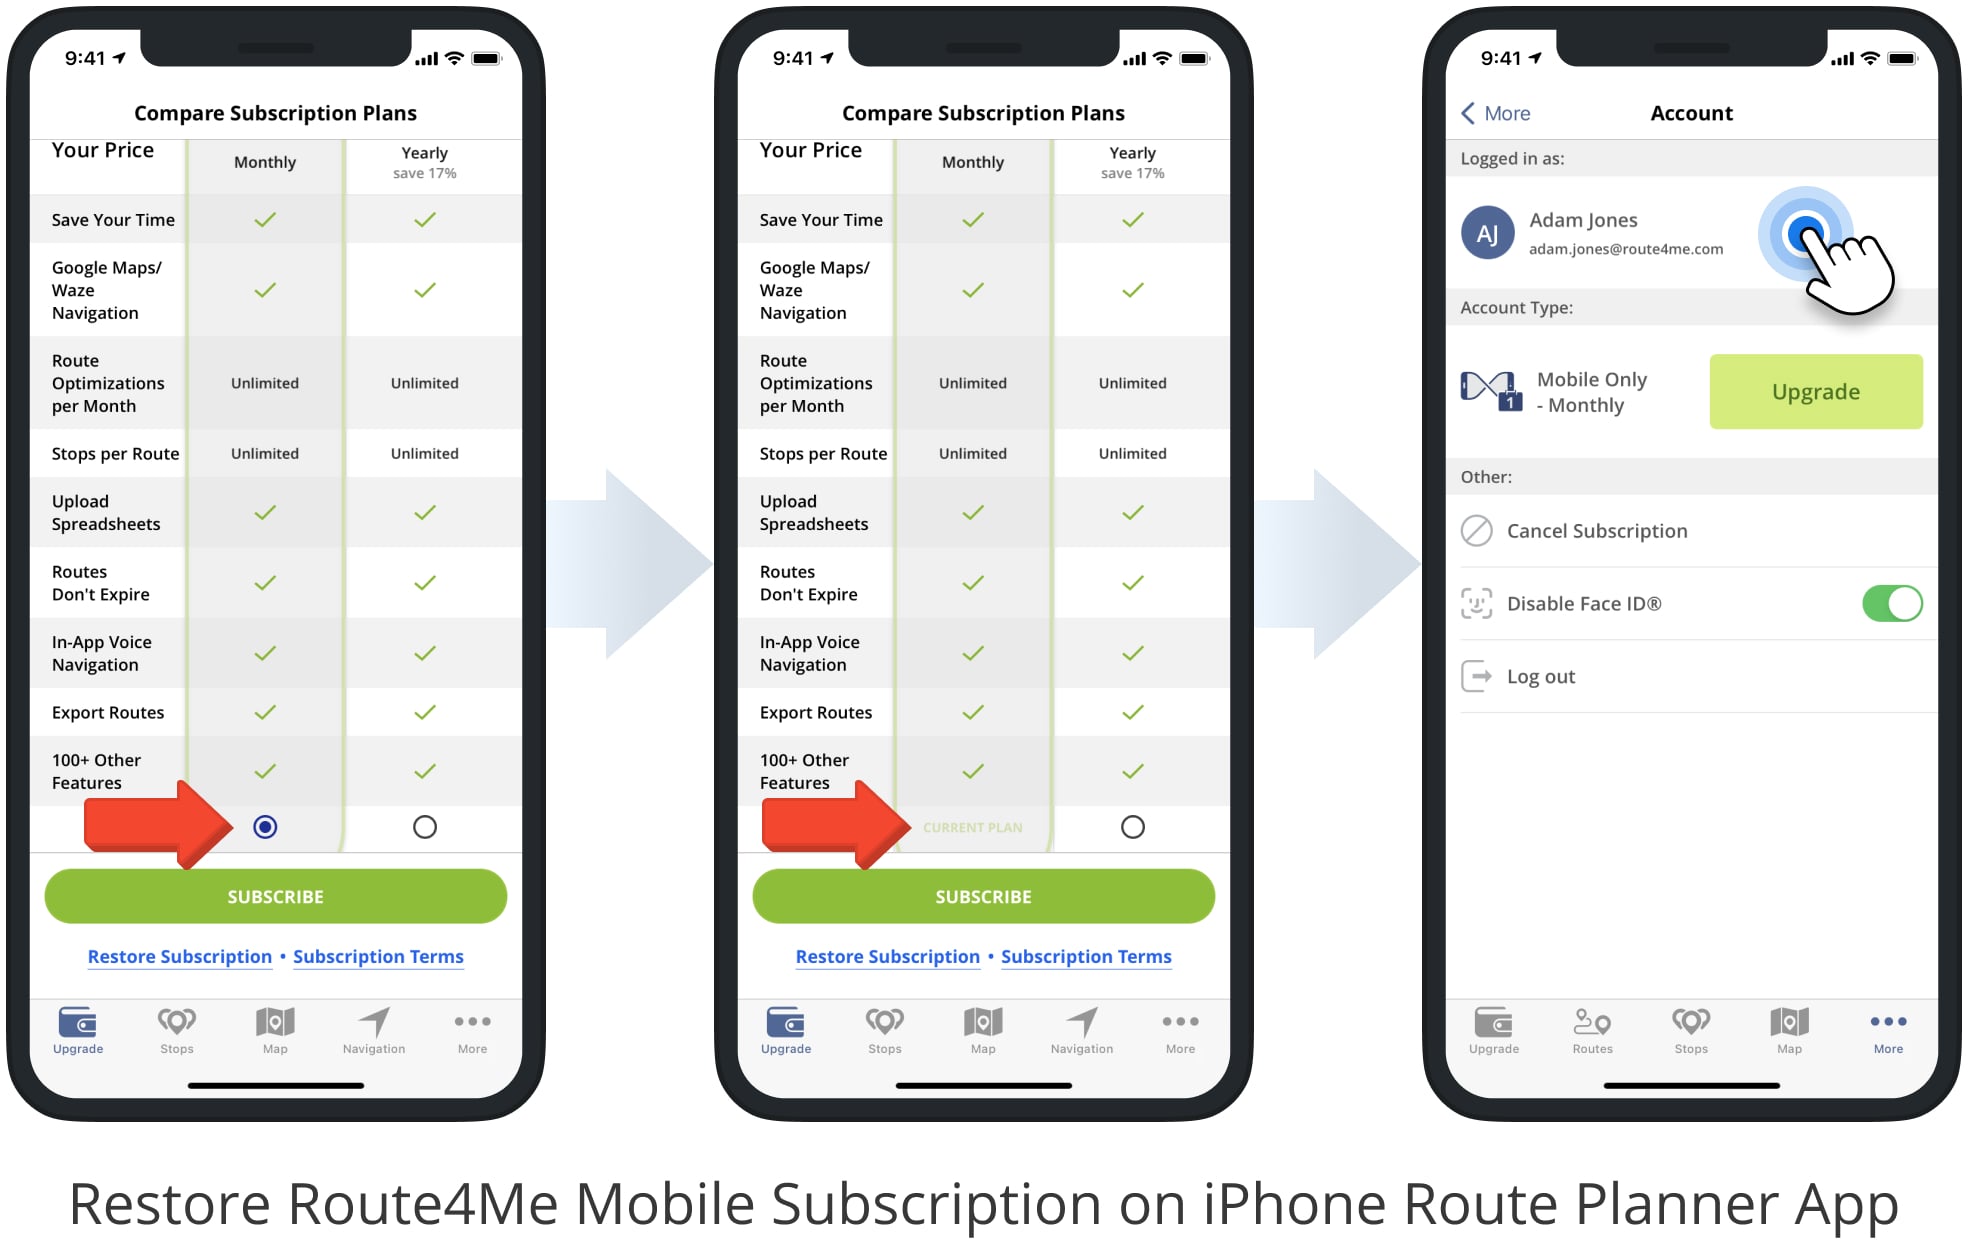 Automatically restore mobile subscription on Route4Me's iPhone Route Planner app and sign into your Route4Me mobile account.